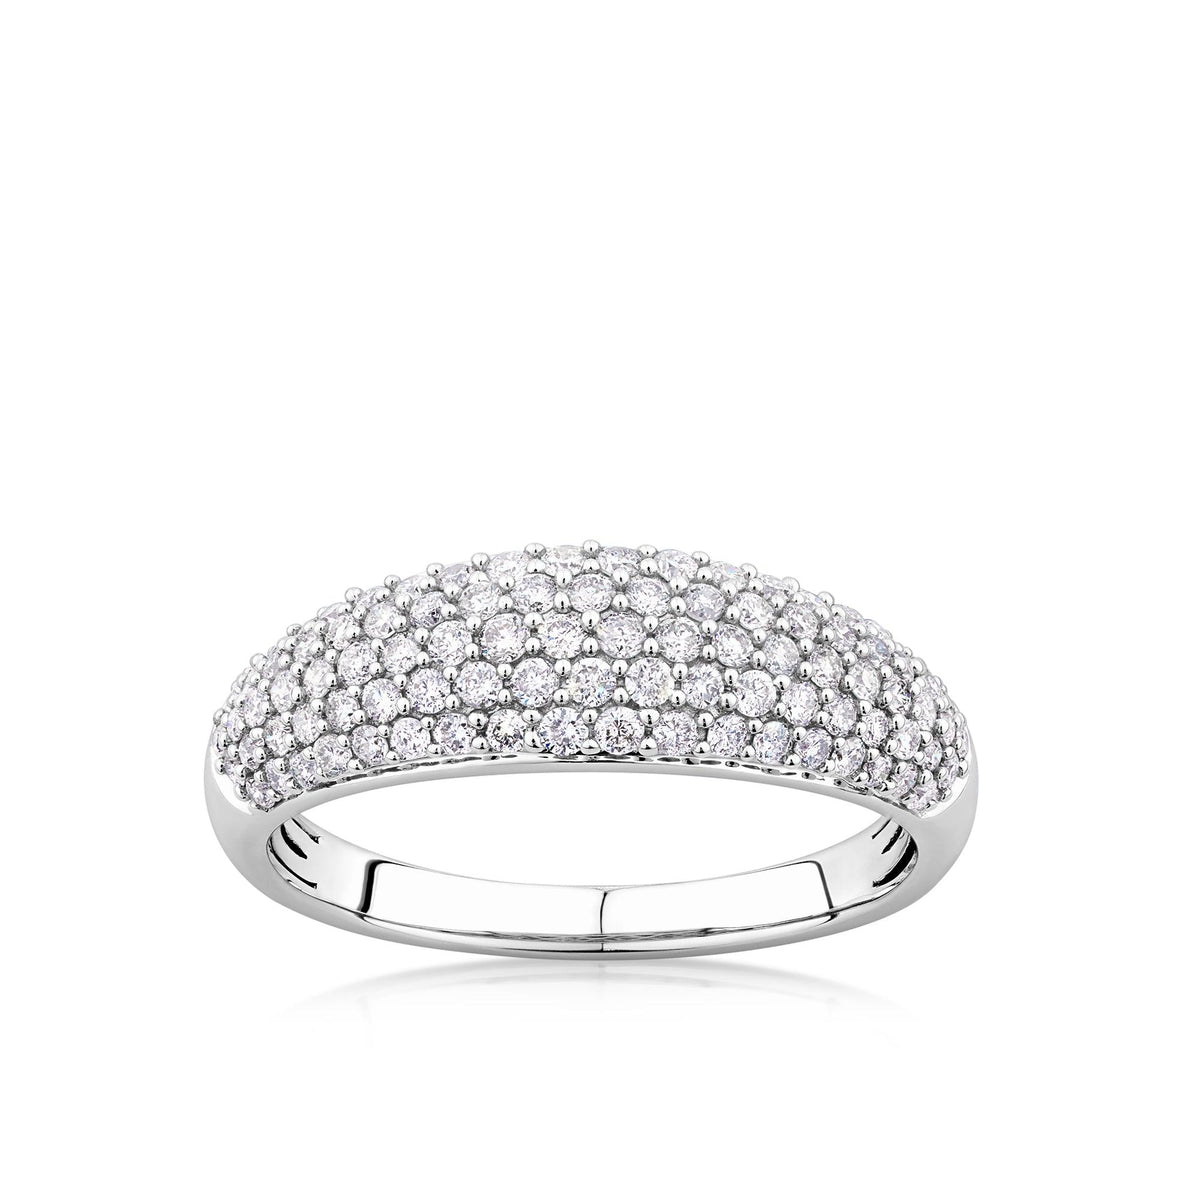 0.60ct TW Diamond Pavé Dome Ring in 9ct White Gold - Wallace Bishop